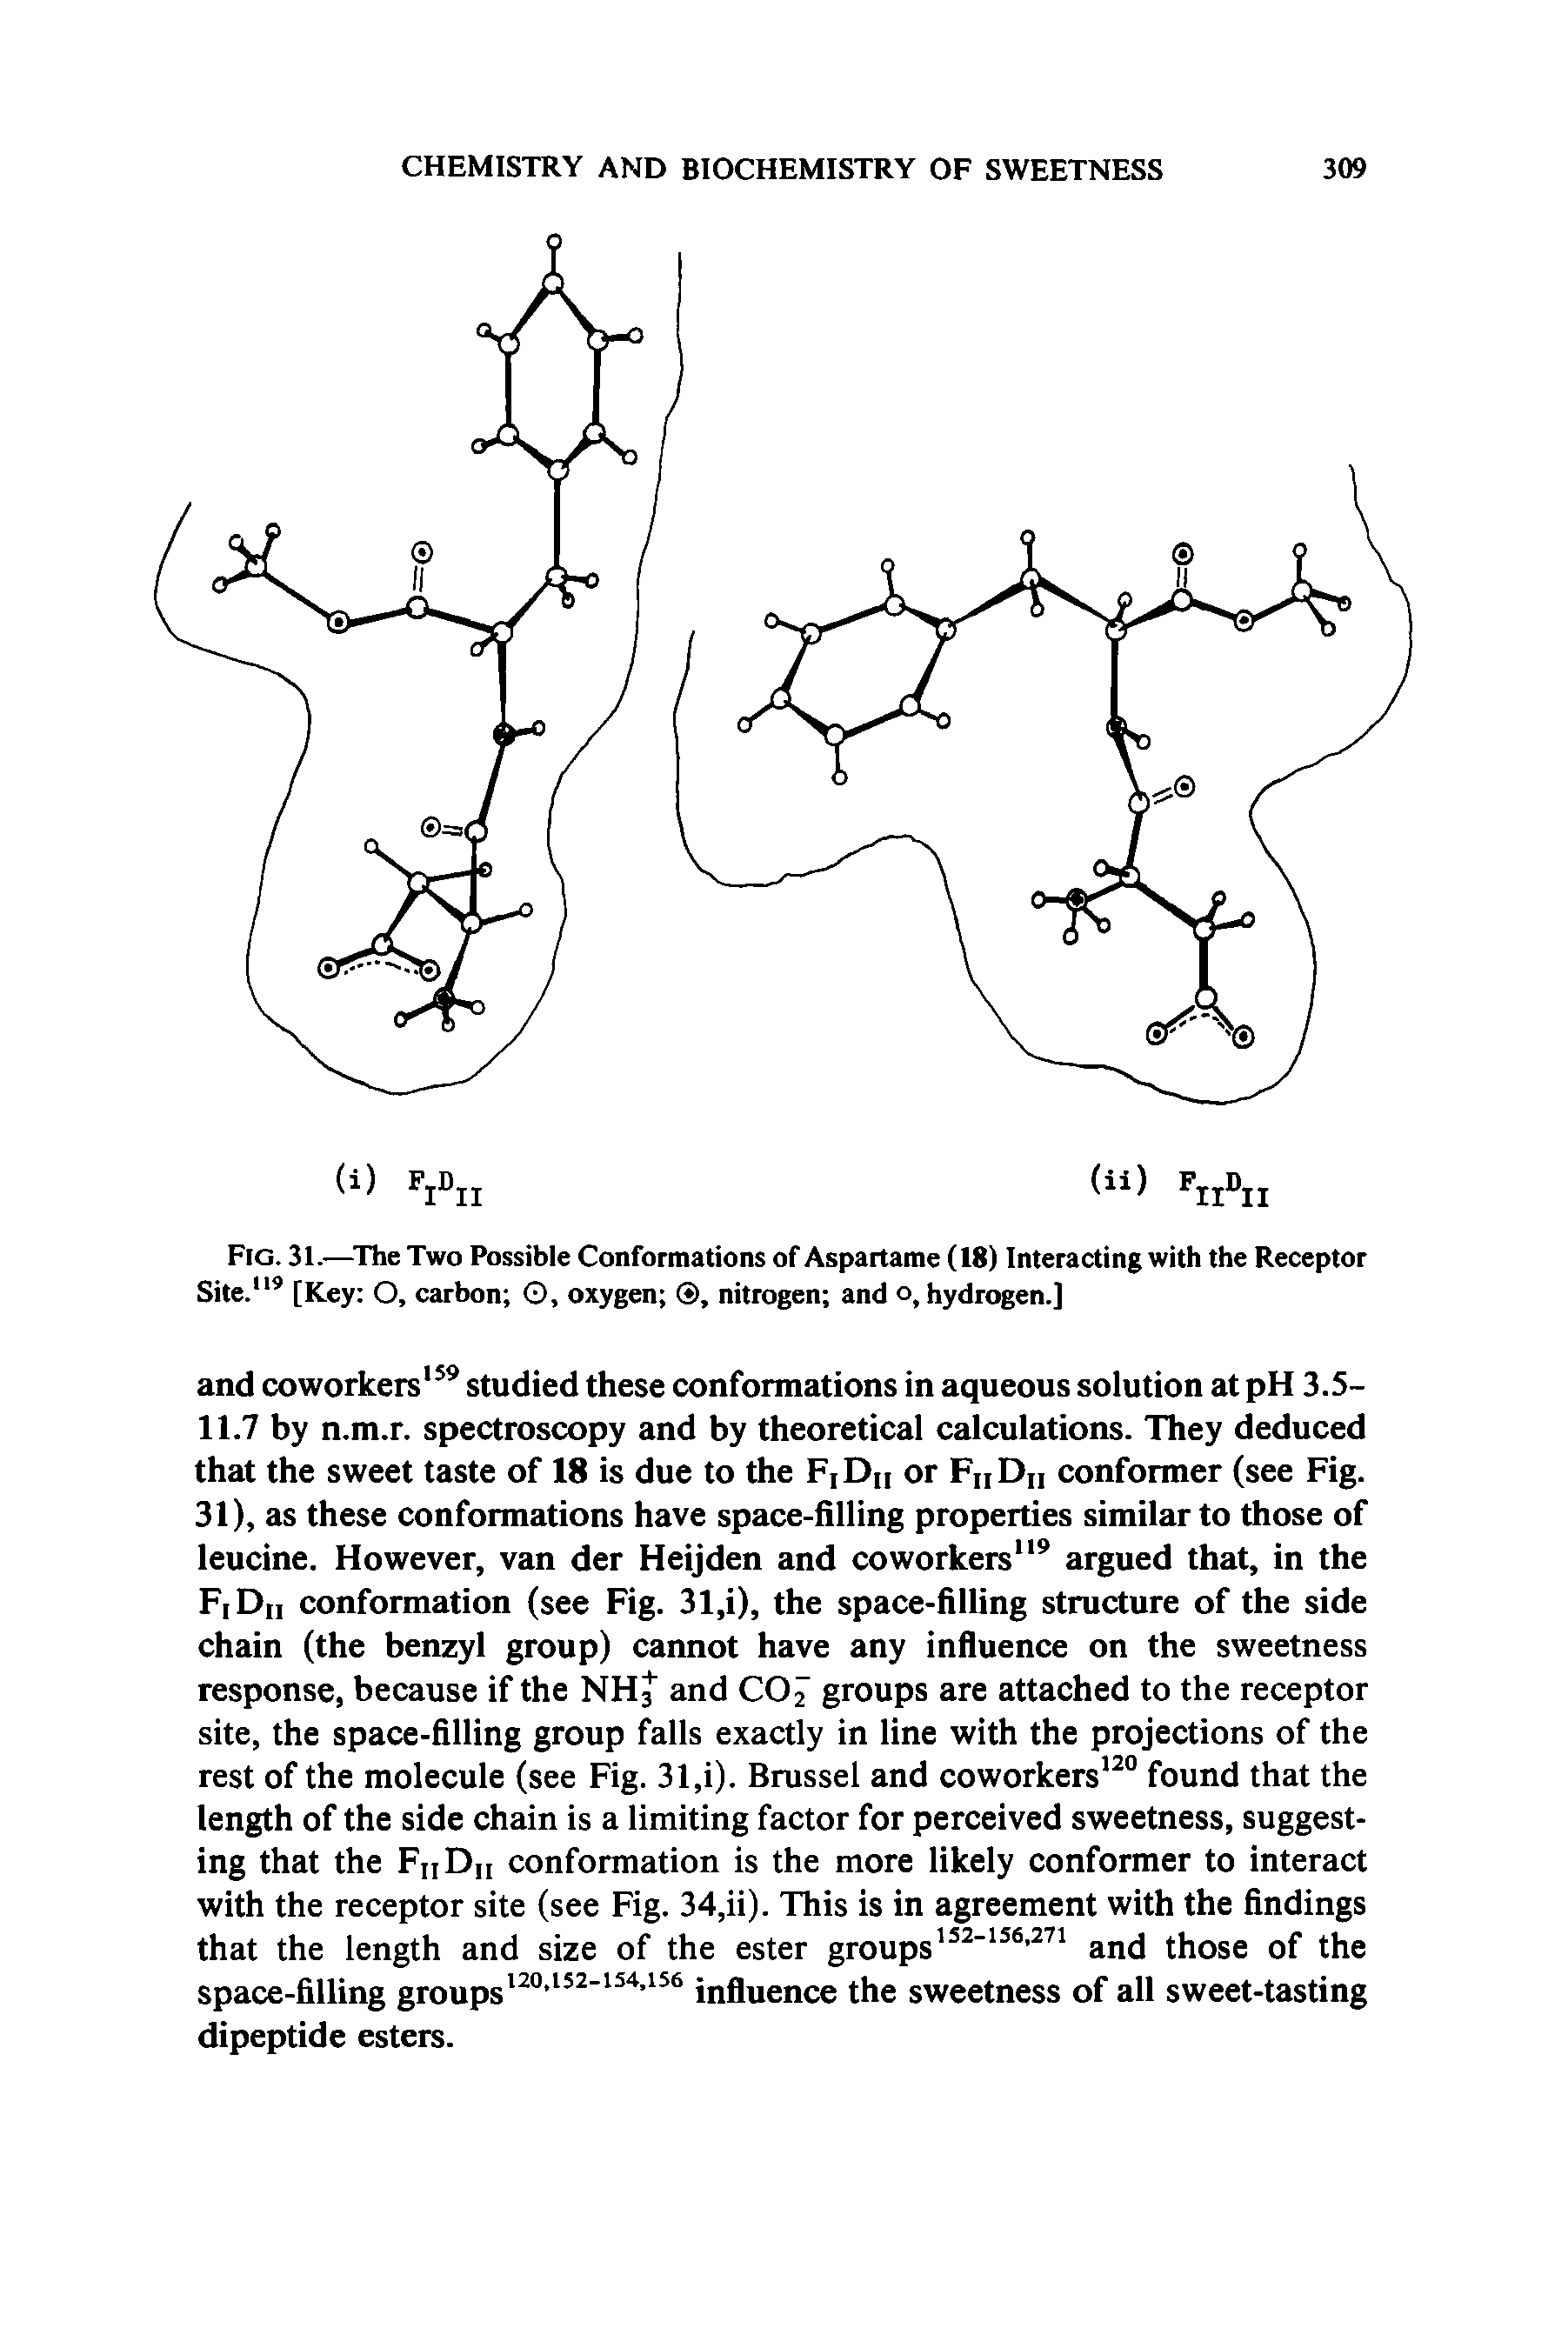 Fig. 31.— The Two Possible Conformations of Aspartame (18) Interacting with the Receptor Site." [Key O, carbon G, oxygen , nitrogen and o, hydrogen.]...